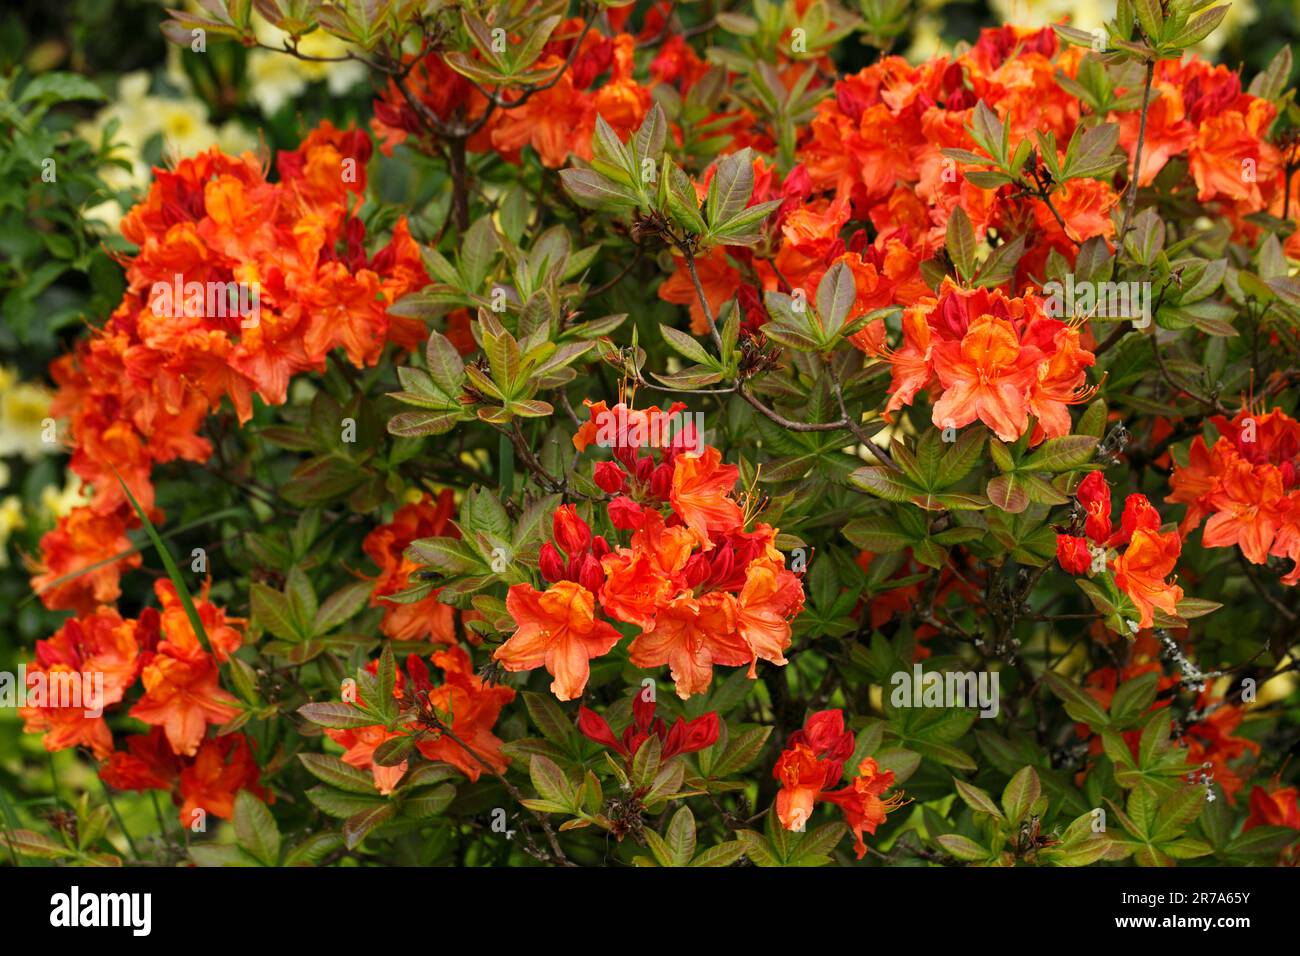 Rhododendron 'Glowing Embers' variety Stock Photo